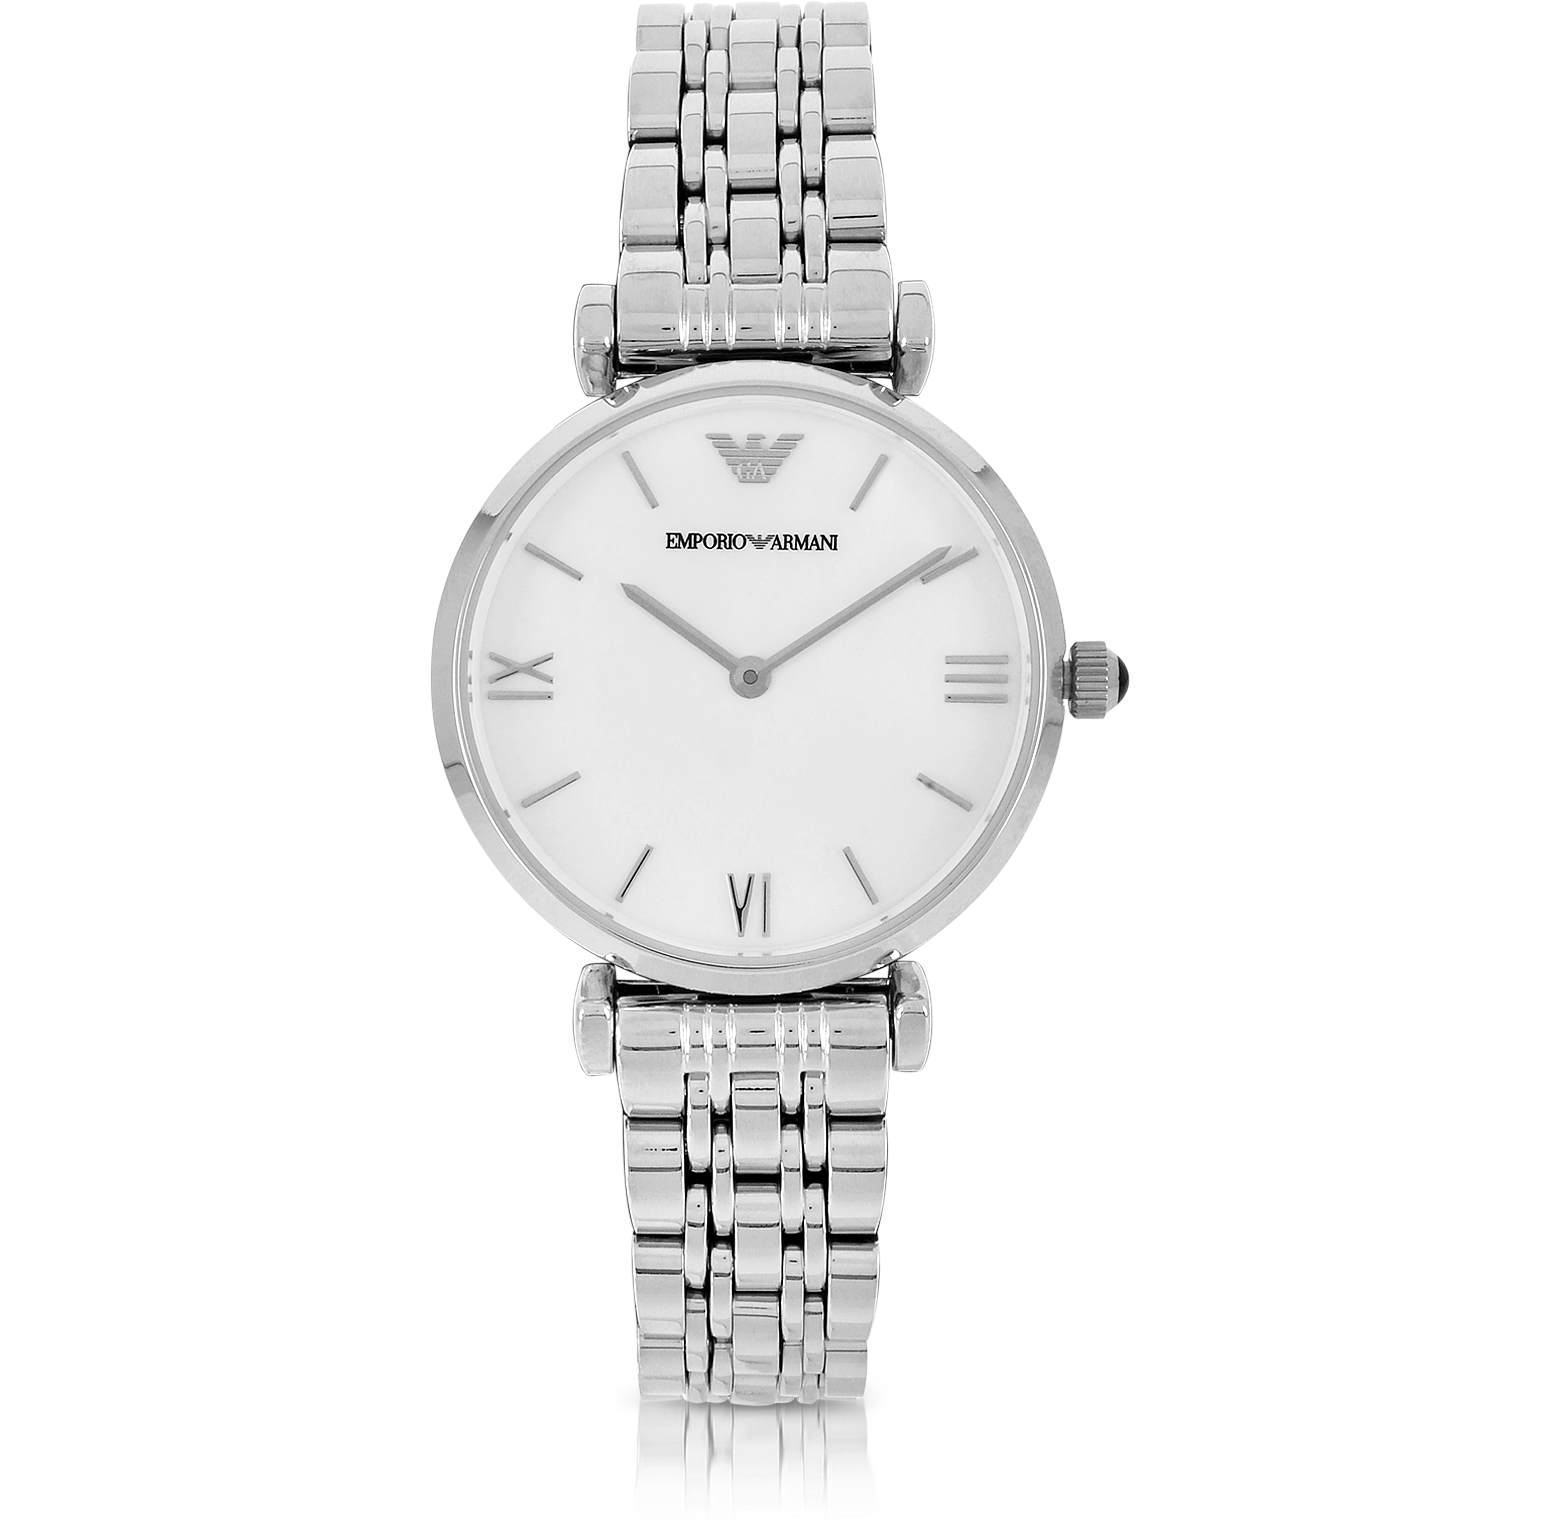 Emporio Armani Stainless Steel Women's Watch at FORZIERI